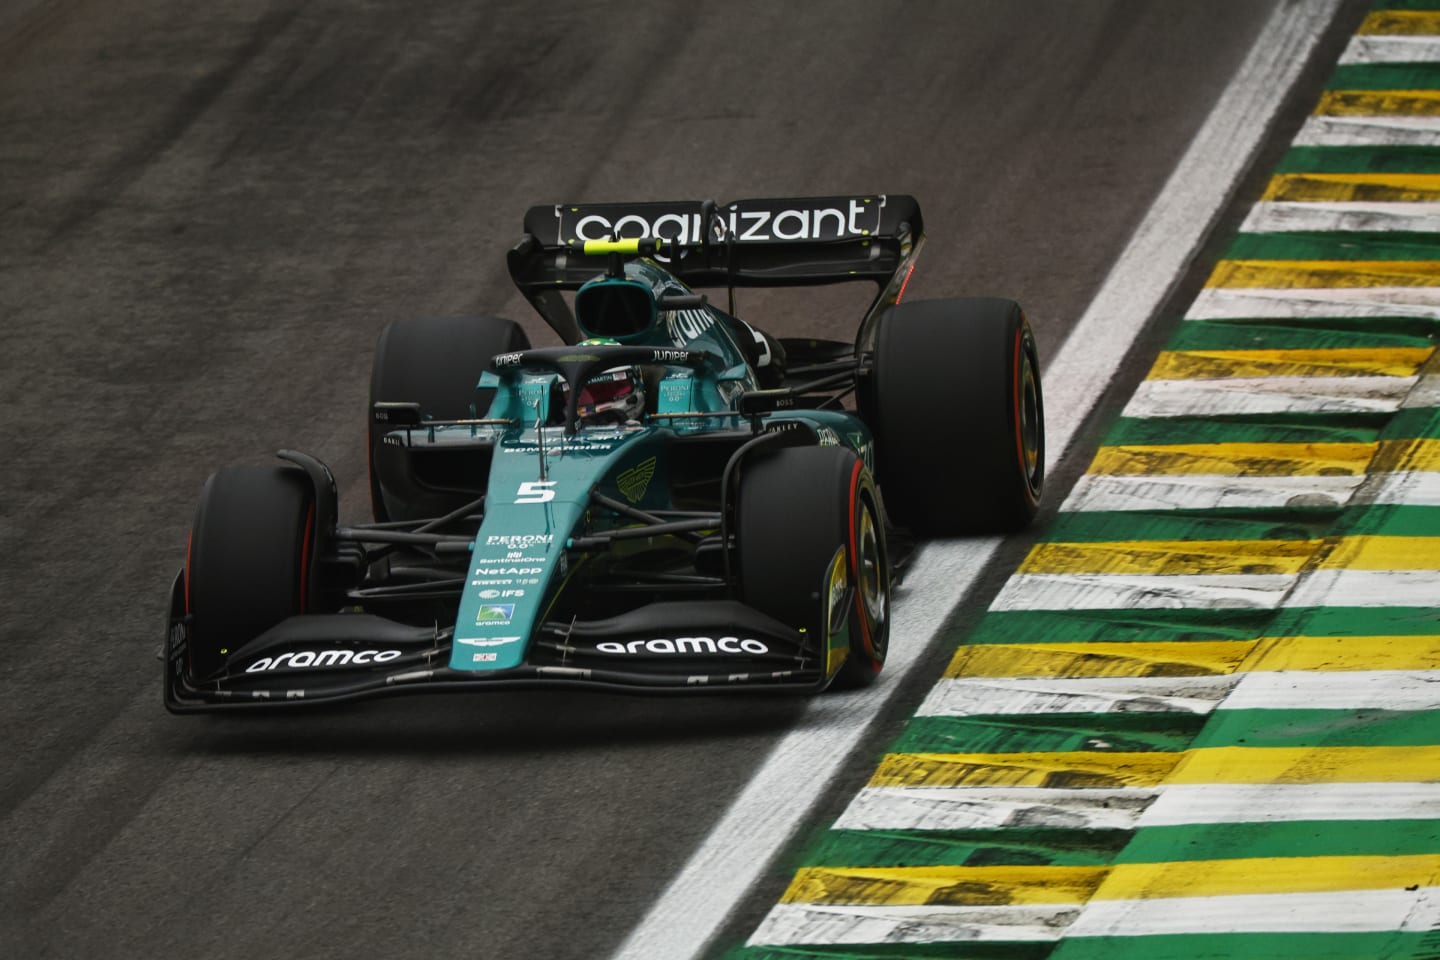 SAO PAULO, BRAZIL - NOVEMBER 11: Sebastian Vettel of Germany driving the (5) Aston Martin AMR22 Mercedes on track during qualifying ahead of the F1 Grand Prix of Brazil at Autodromo Jose Carlos Pace on November 11, 2022 in Sao Paulo, Brazil. (Photo by Chris Graythen/Getty Images)